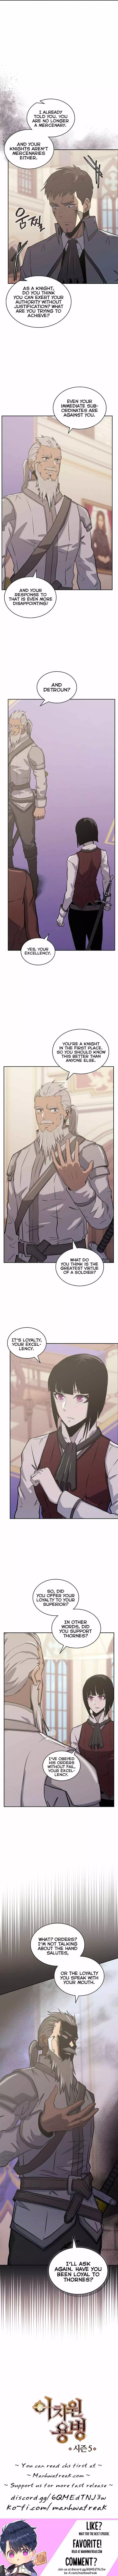 Other World Warrior - 212 page 6-54e920f0